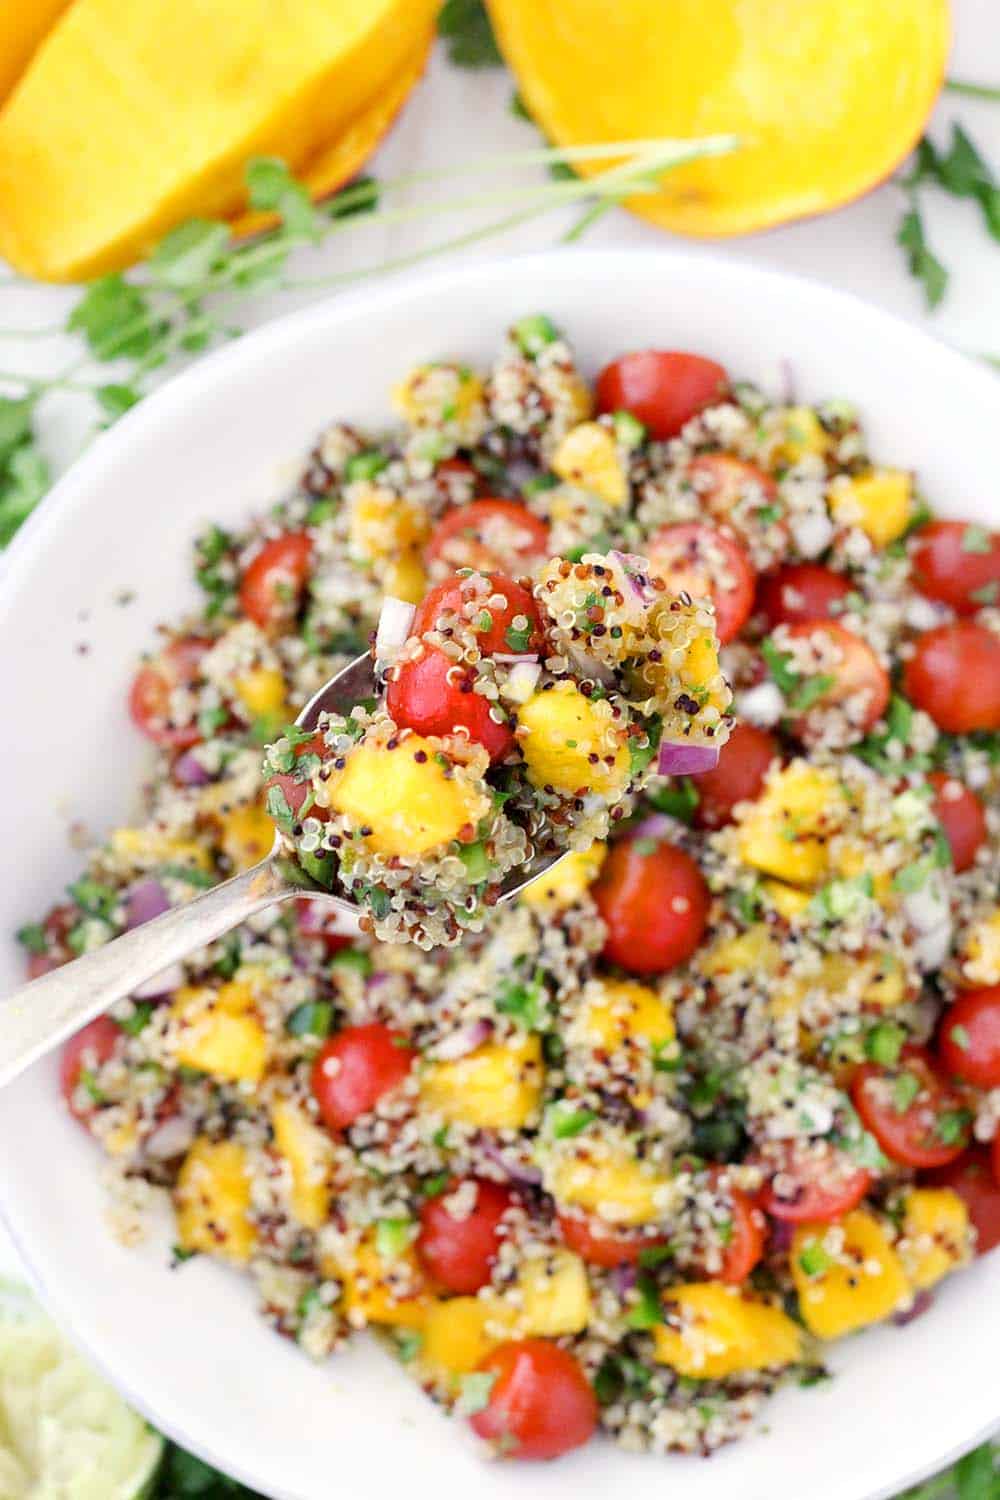 Served cold, this refreshing Mango Quinoa Salad is the perfect sweet/spicy balance, with jalapeños, cilantro, onion, and tomatoes. Make this vegan recipe ahead of time and serve straight out of the fridge! It's amazing paired with a spicy protein, like blackened tilapia or jerk chicken.